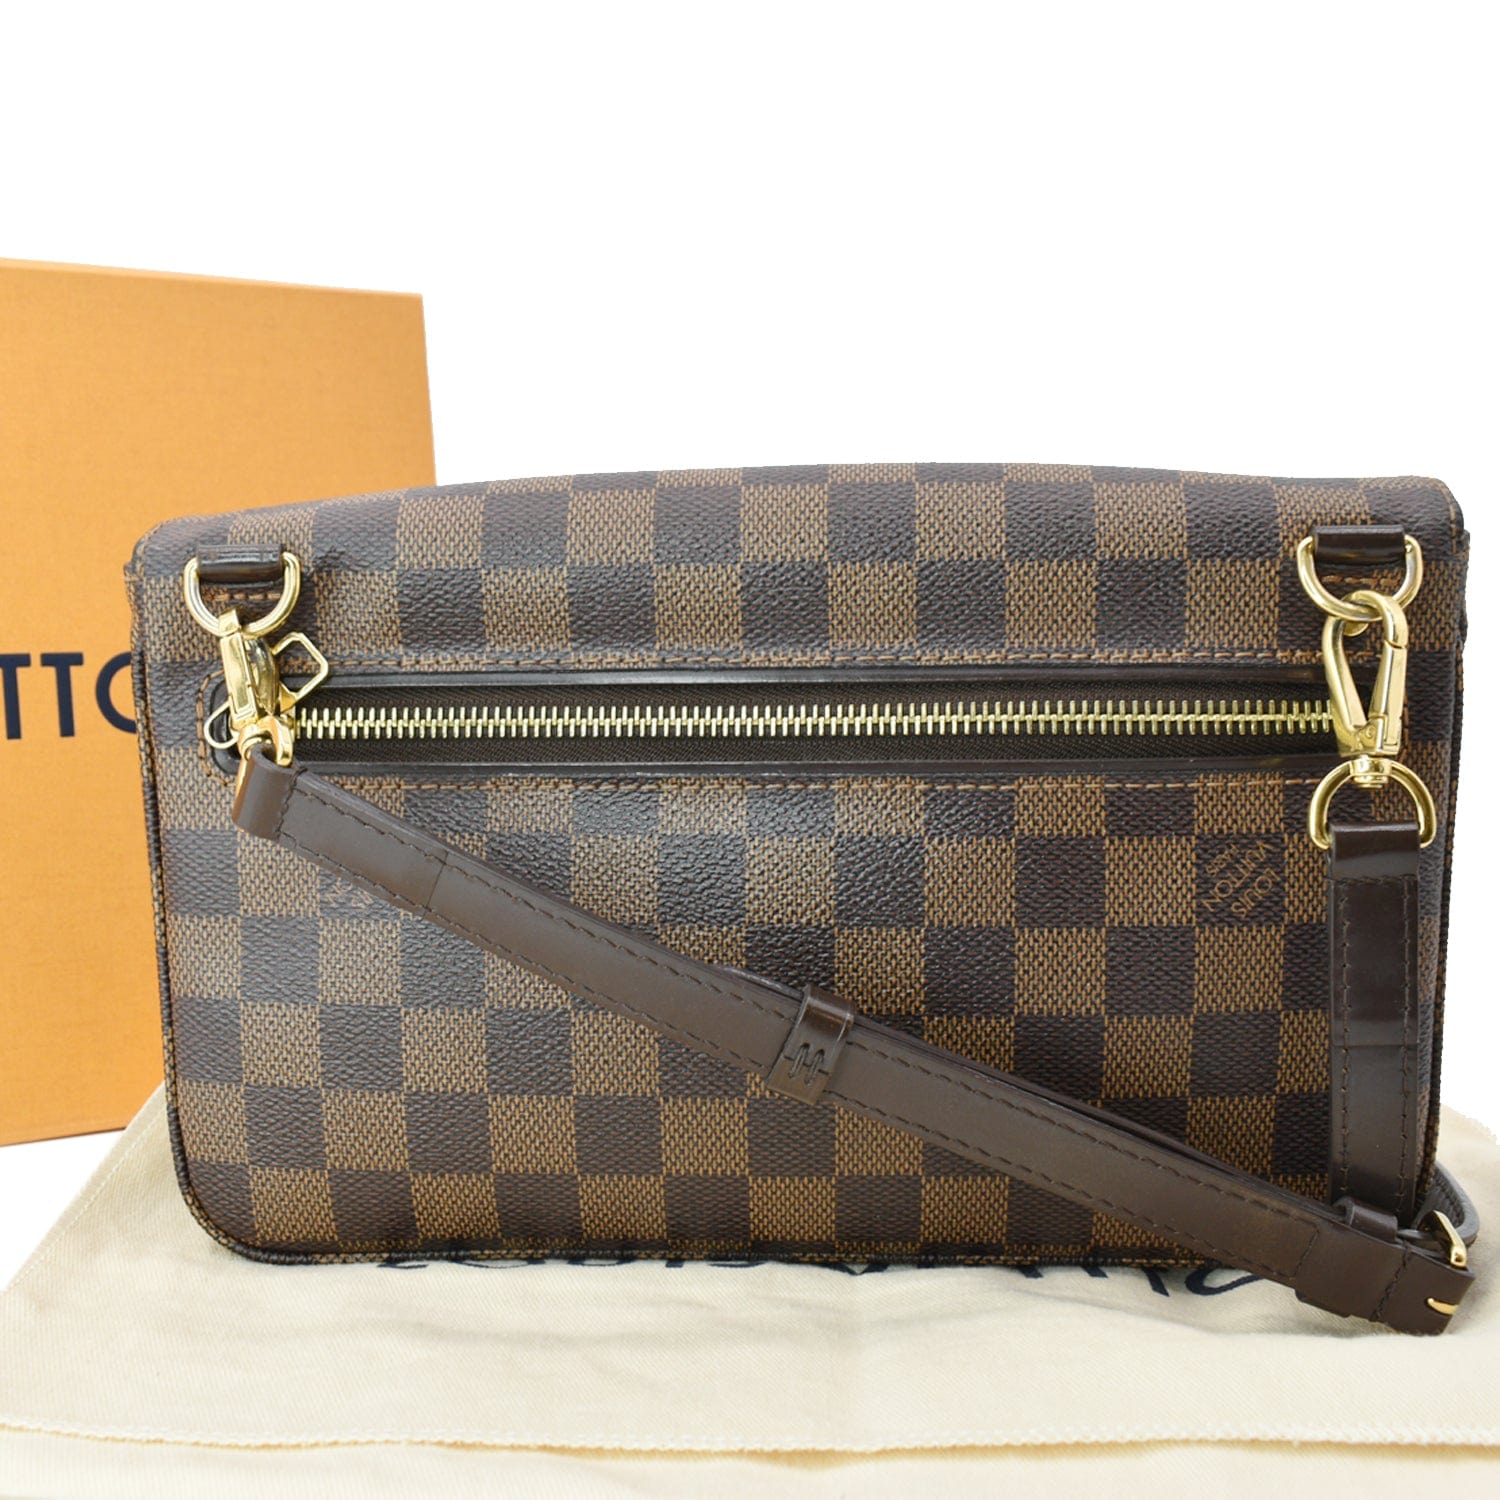 Hoxton leather crossbody bag Louis Vuitton Brown in Leather - 22676700